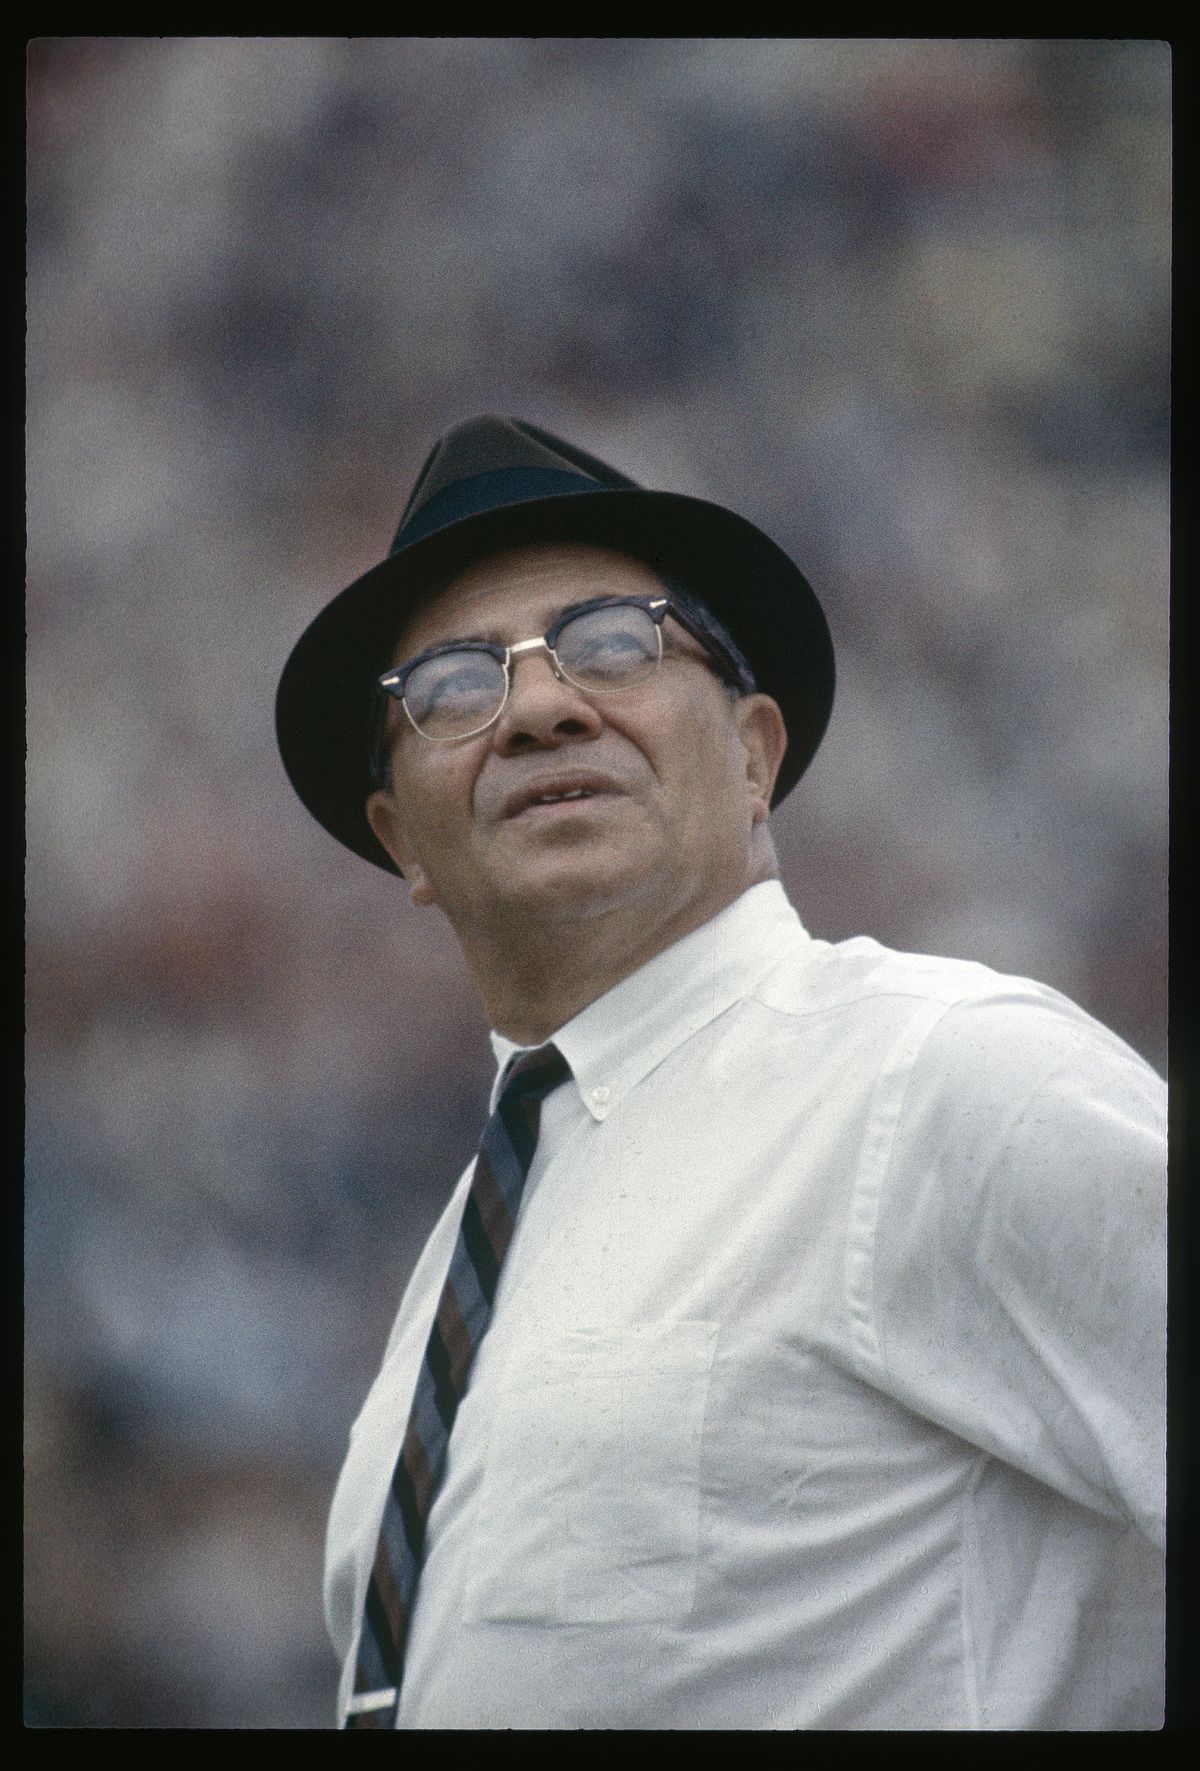 Vince Lombardi didn’t lose much, but he did lose in his first appearance in...